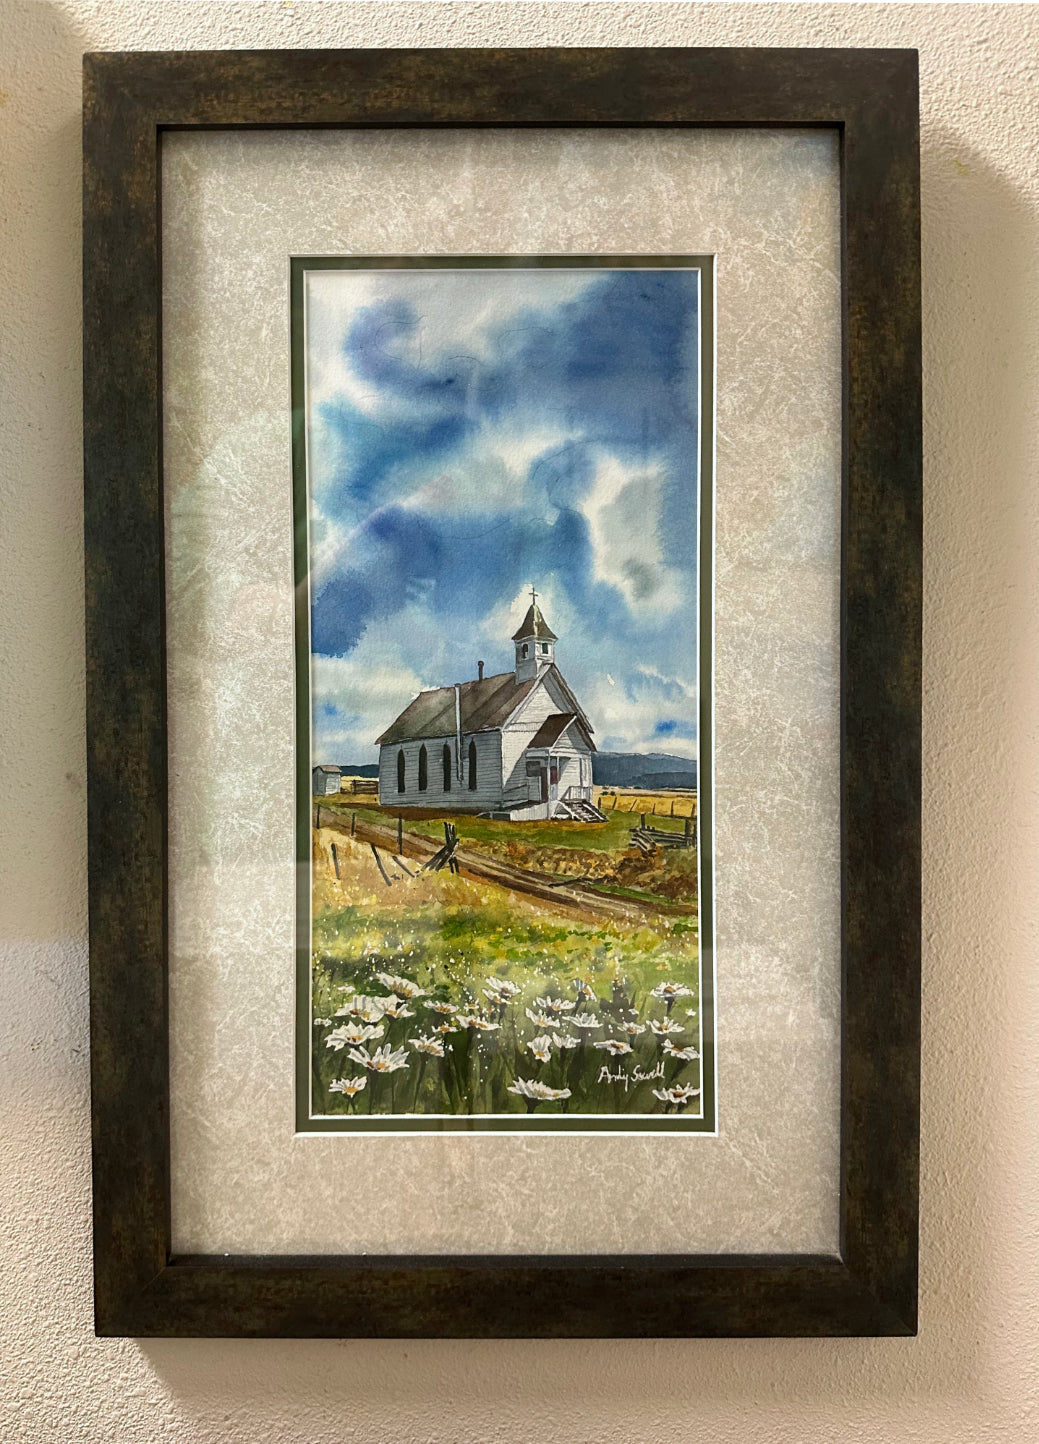 "Churchyard Daisies" 12x20" framed Original watercolor, or signed Giclee Reprod. of an old country church